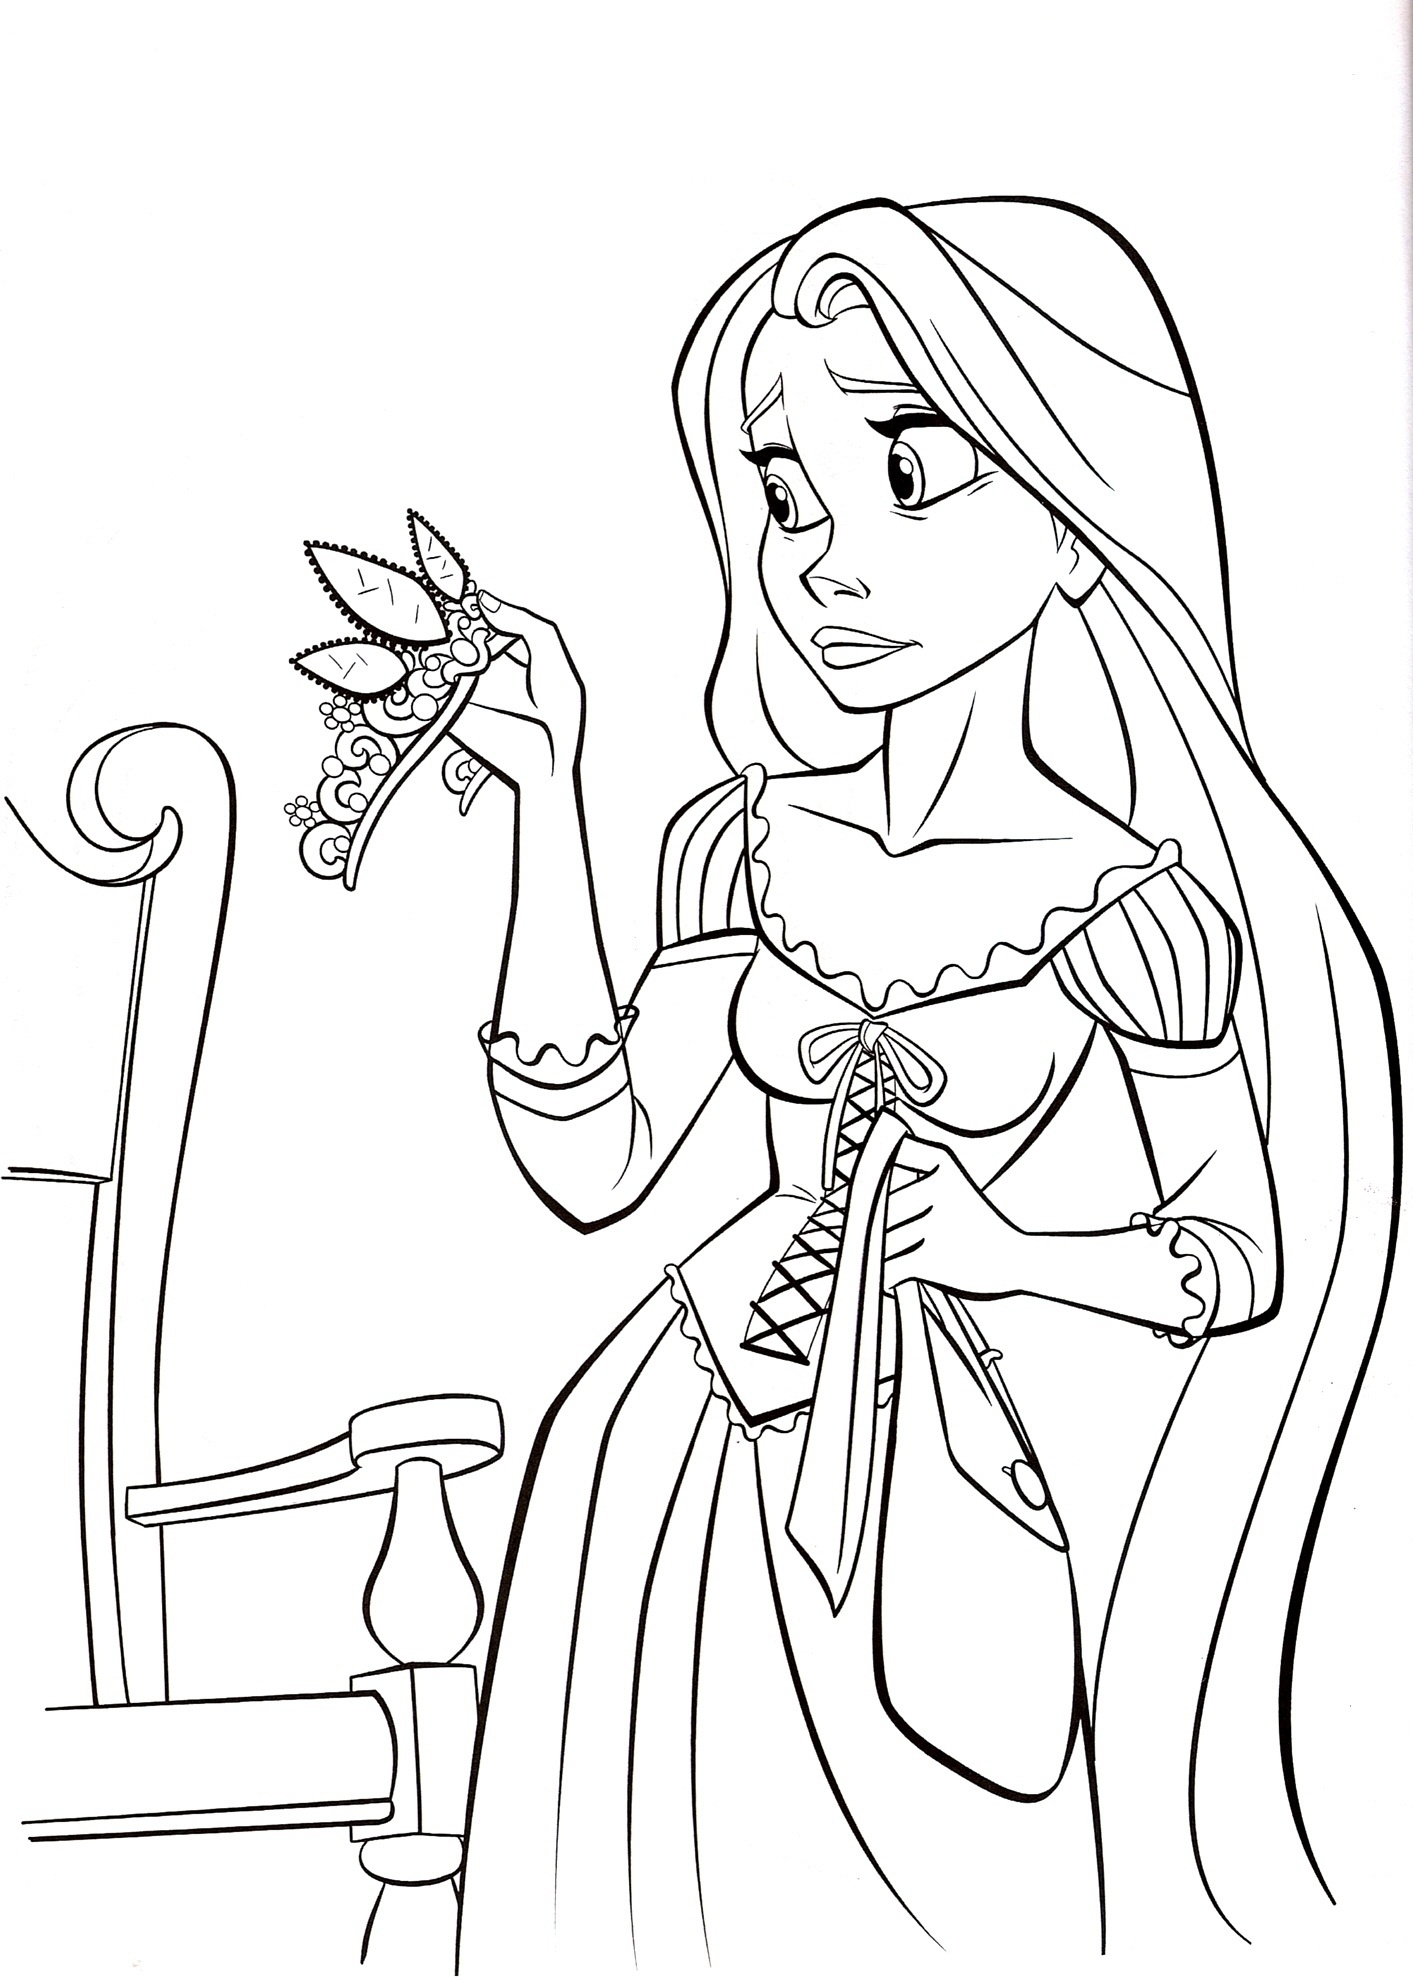 Free Printable Tangled Coloring Pages For Kids - Free Printable Tangled